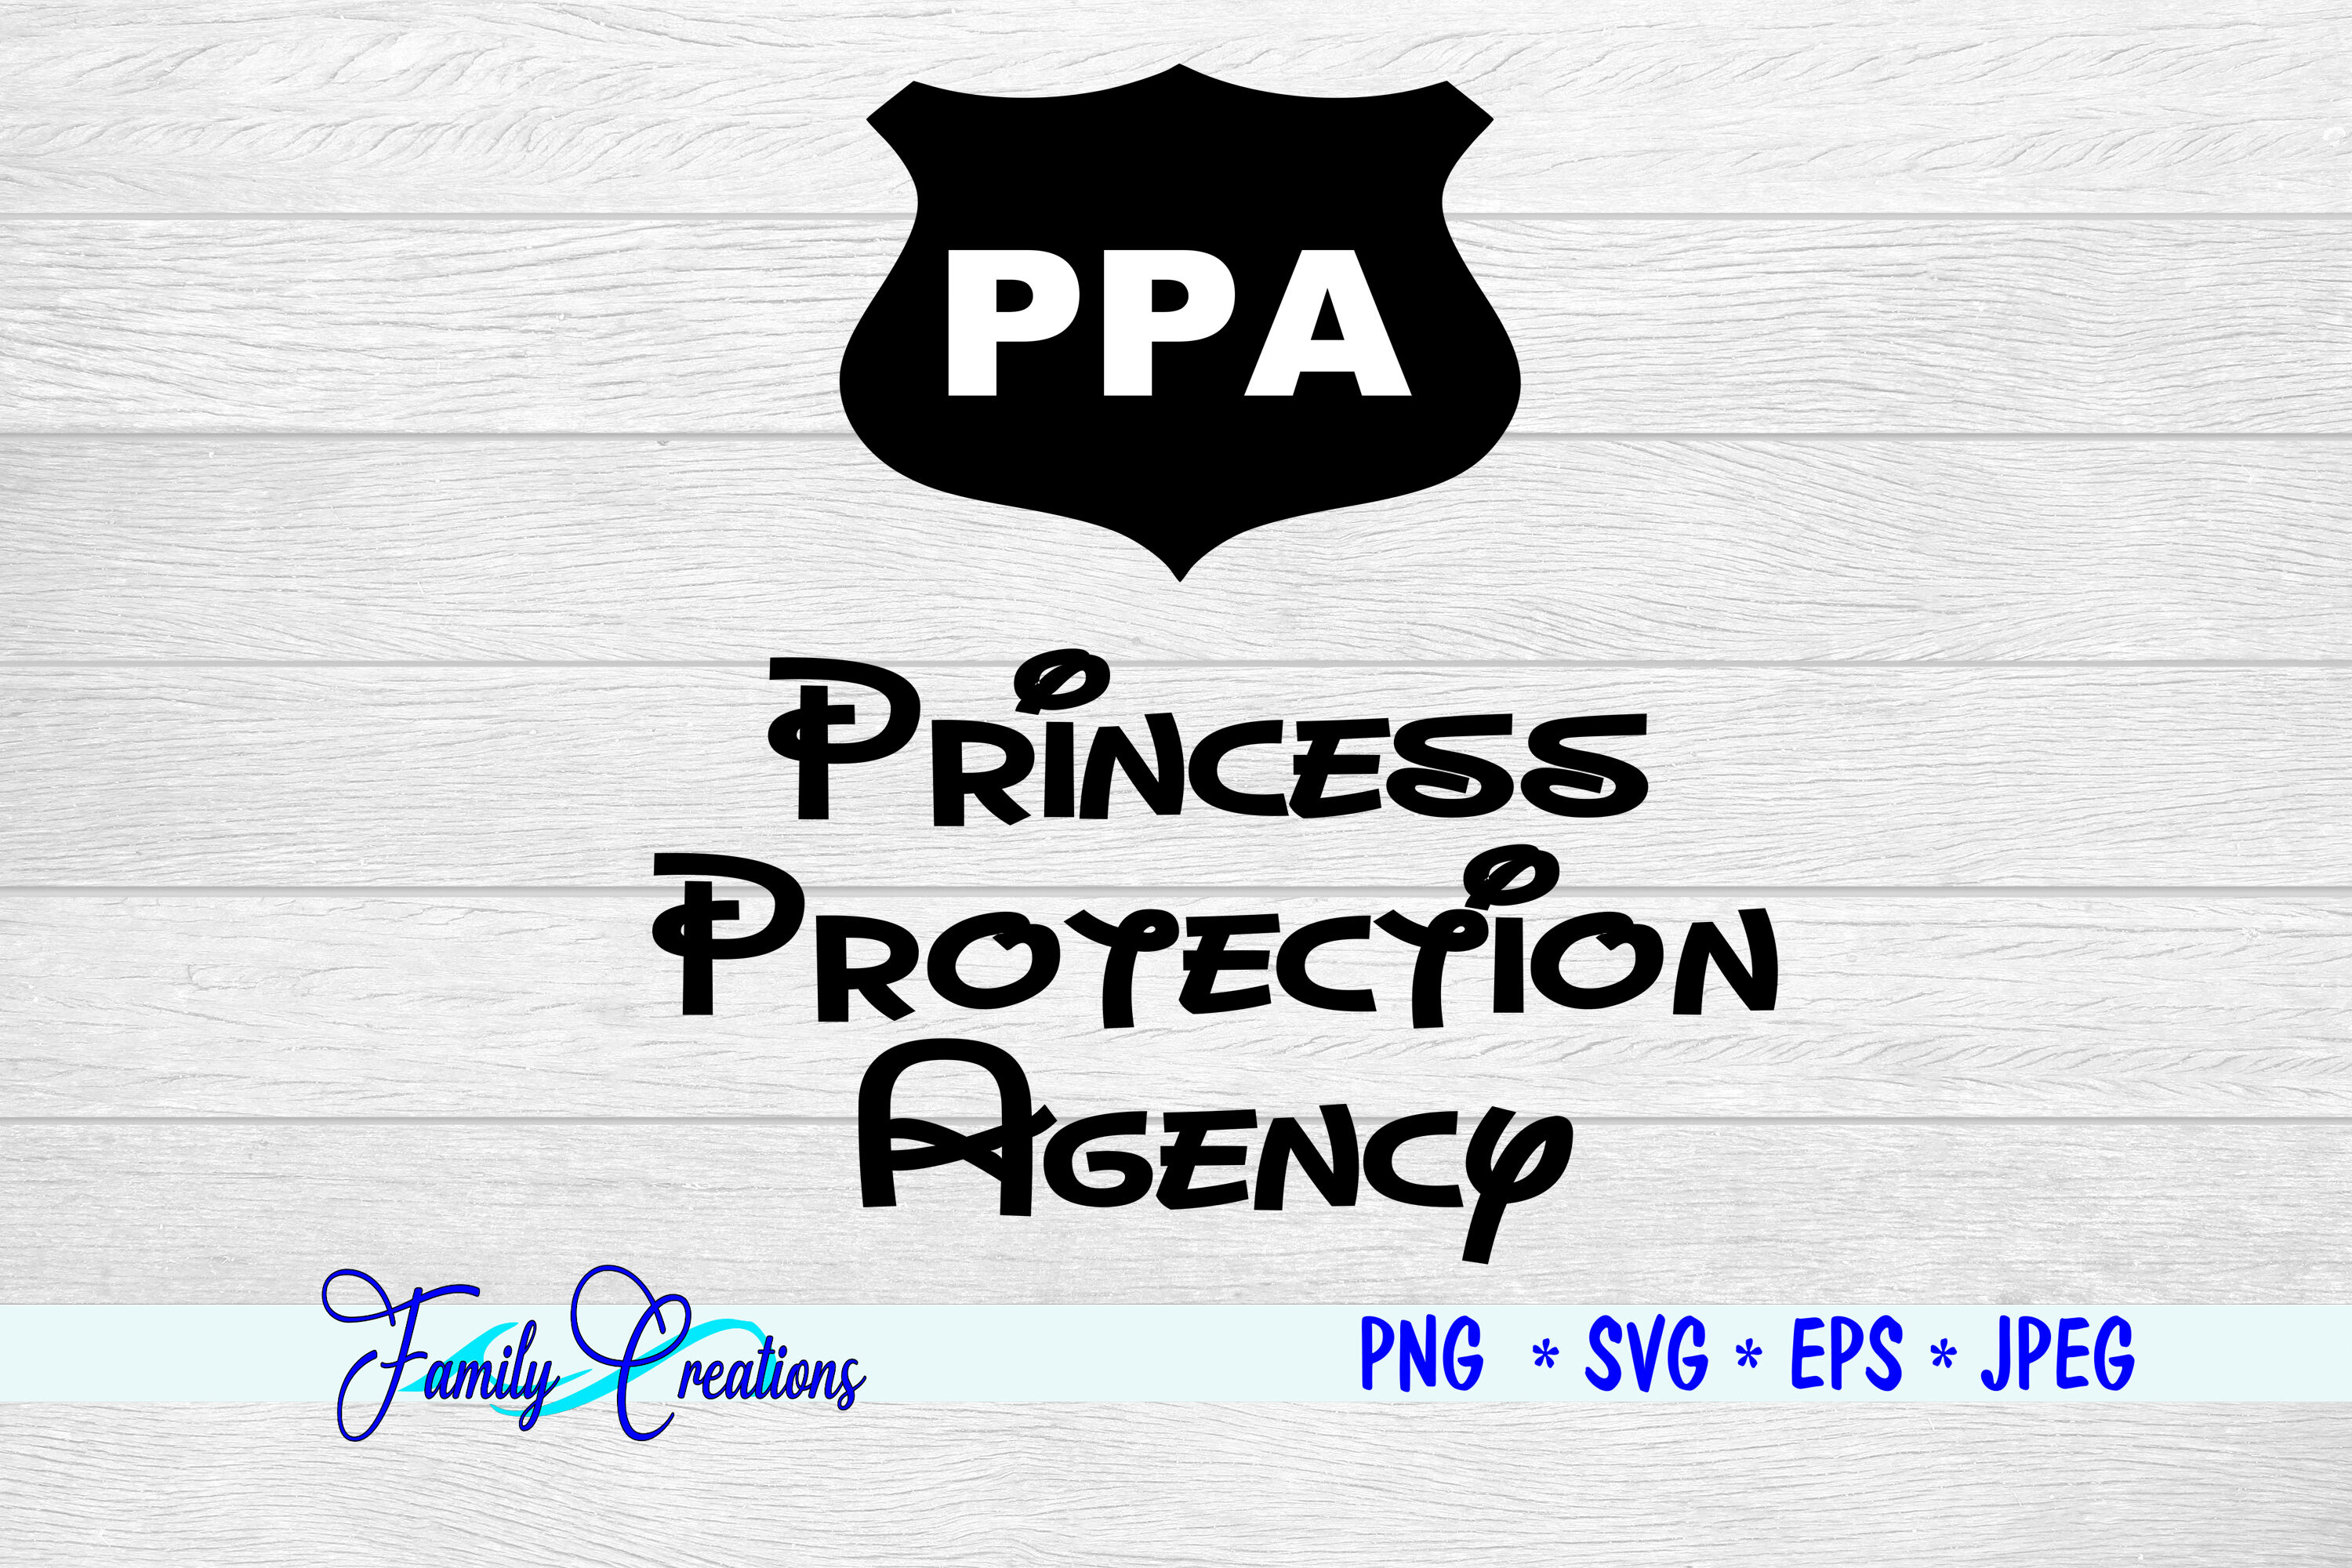 Ppa Princess Protection Agency By Family Creations Thehungryjpeg Com